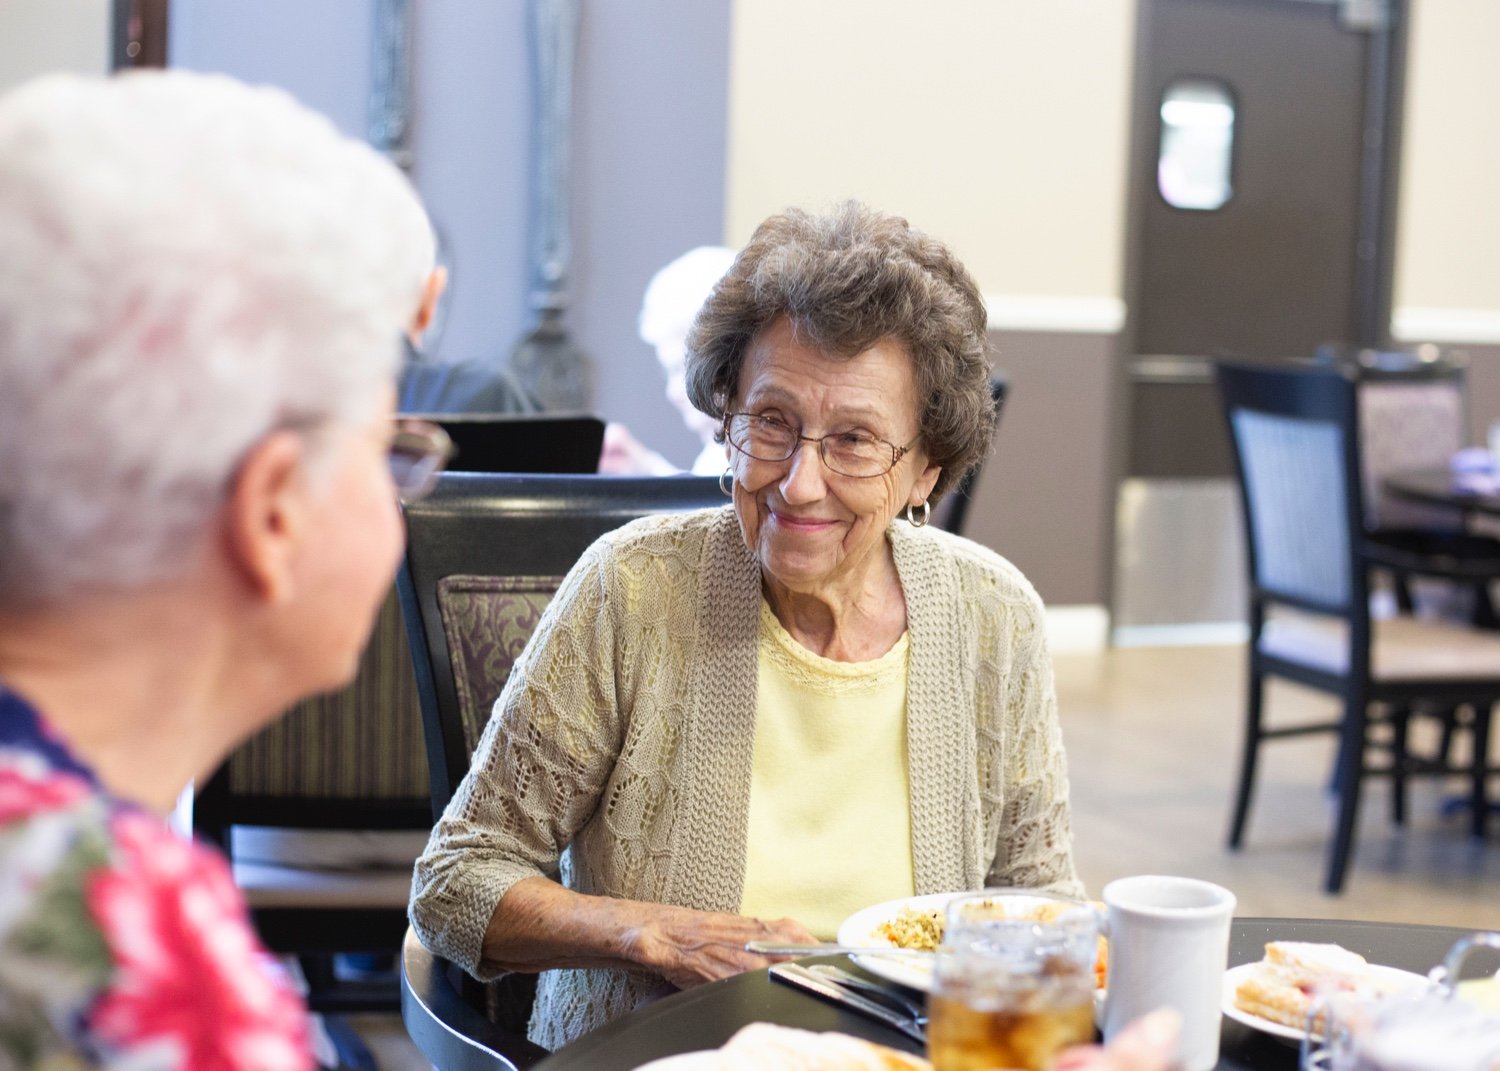 Residents Dining and Having Conversation